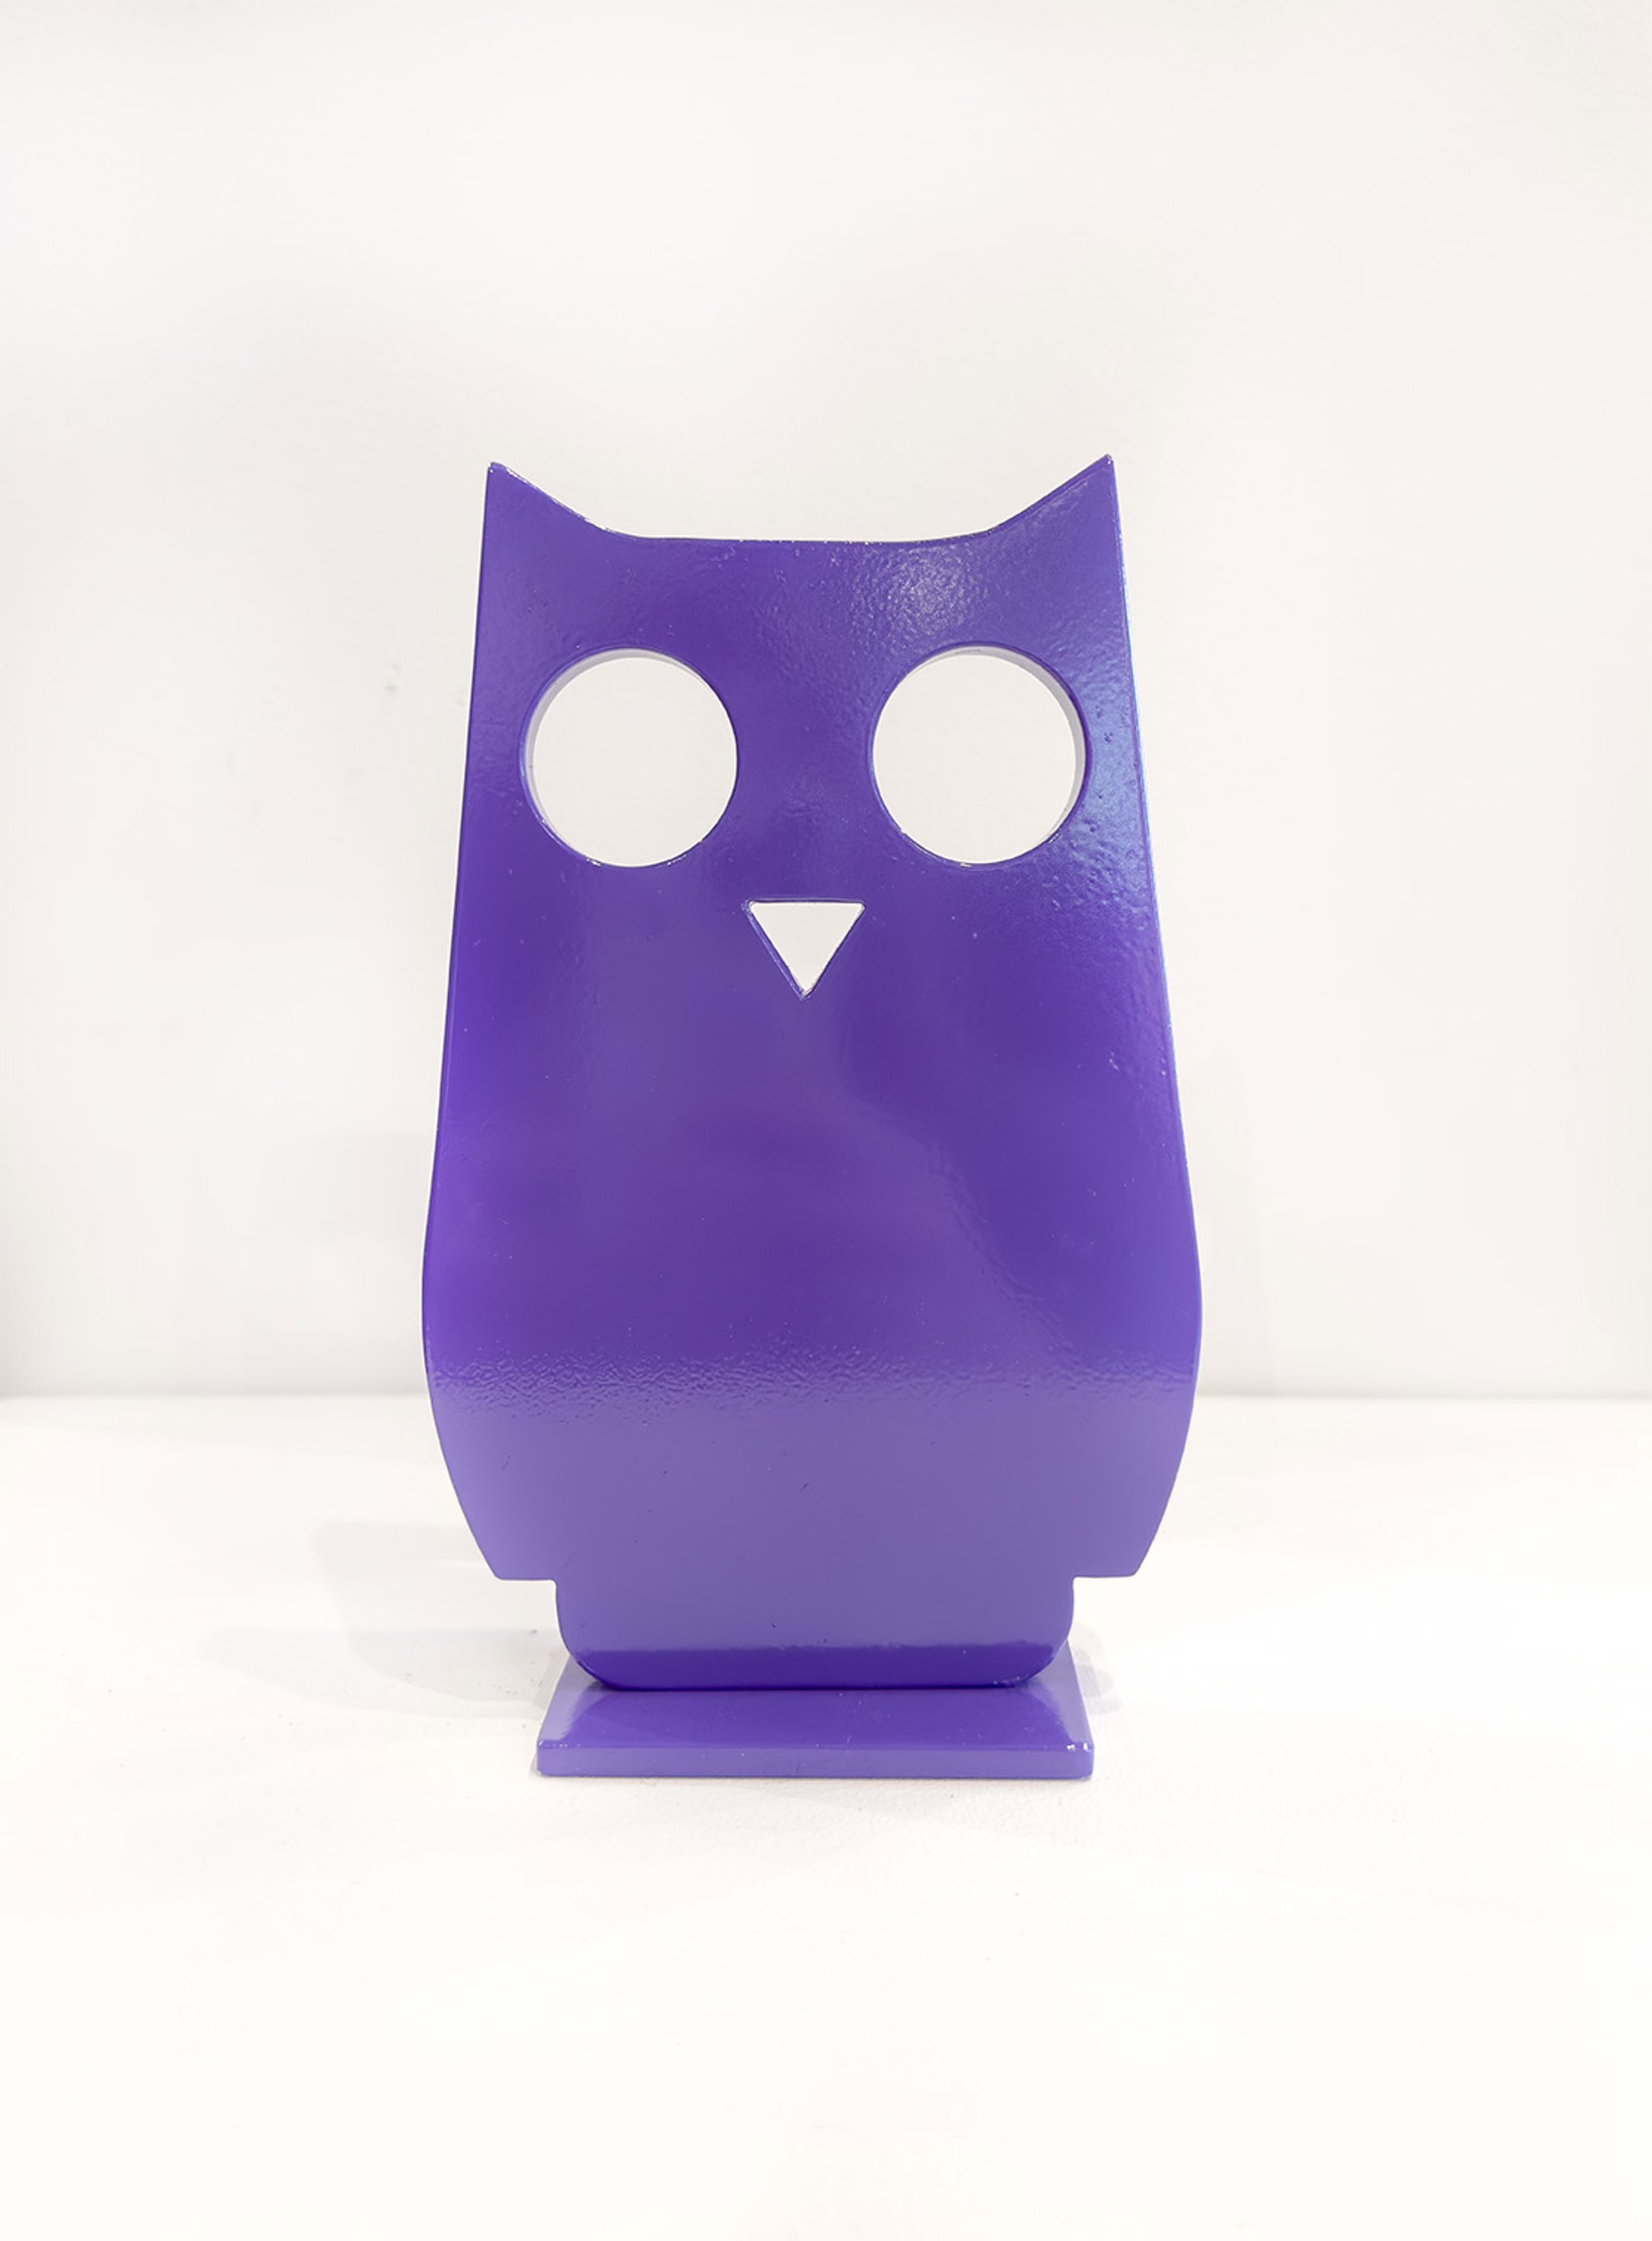 Miniature Aluminum Sculpture By Jeffie Brewer Featuring A Simplified Owl In Purple Finish